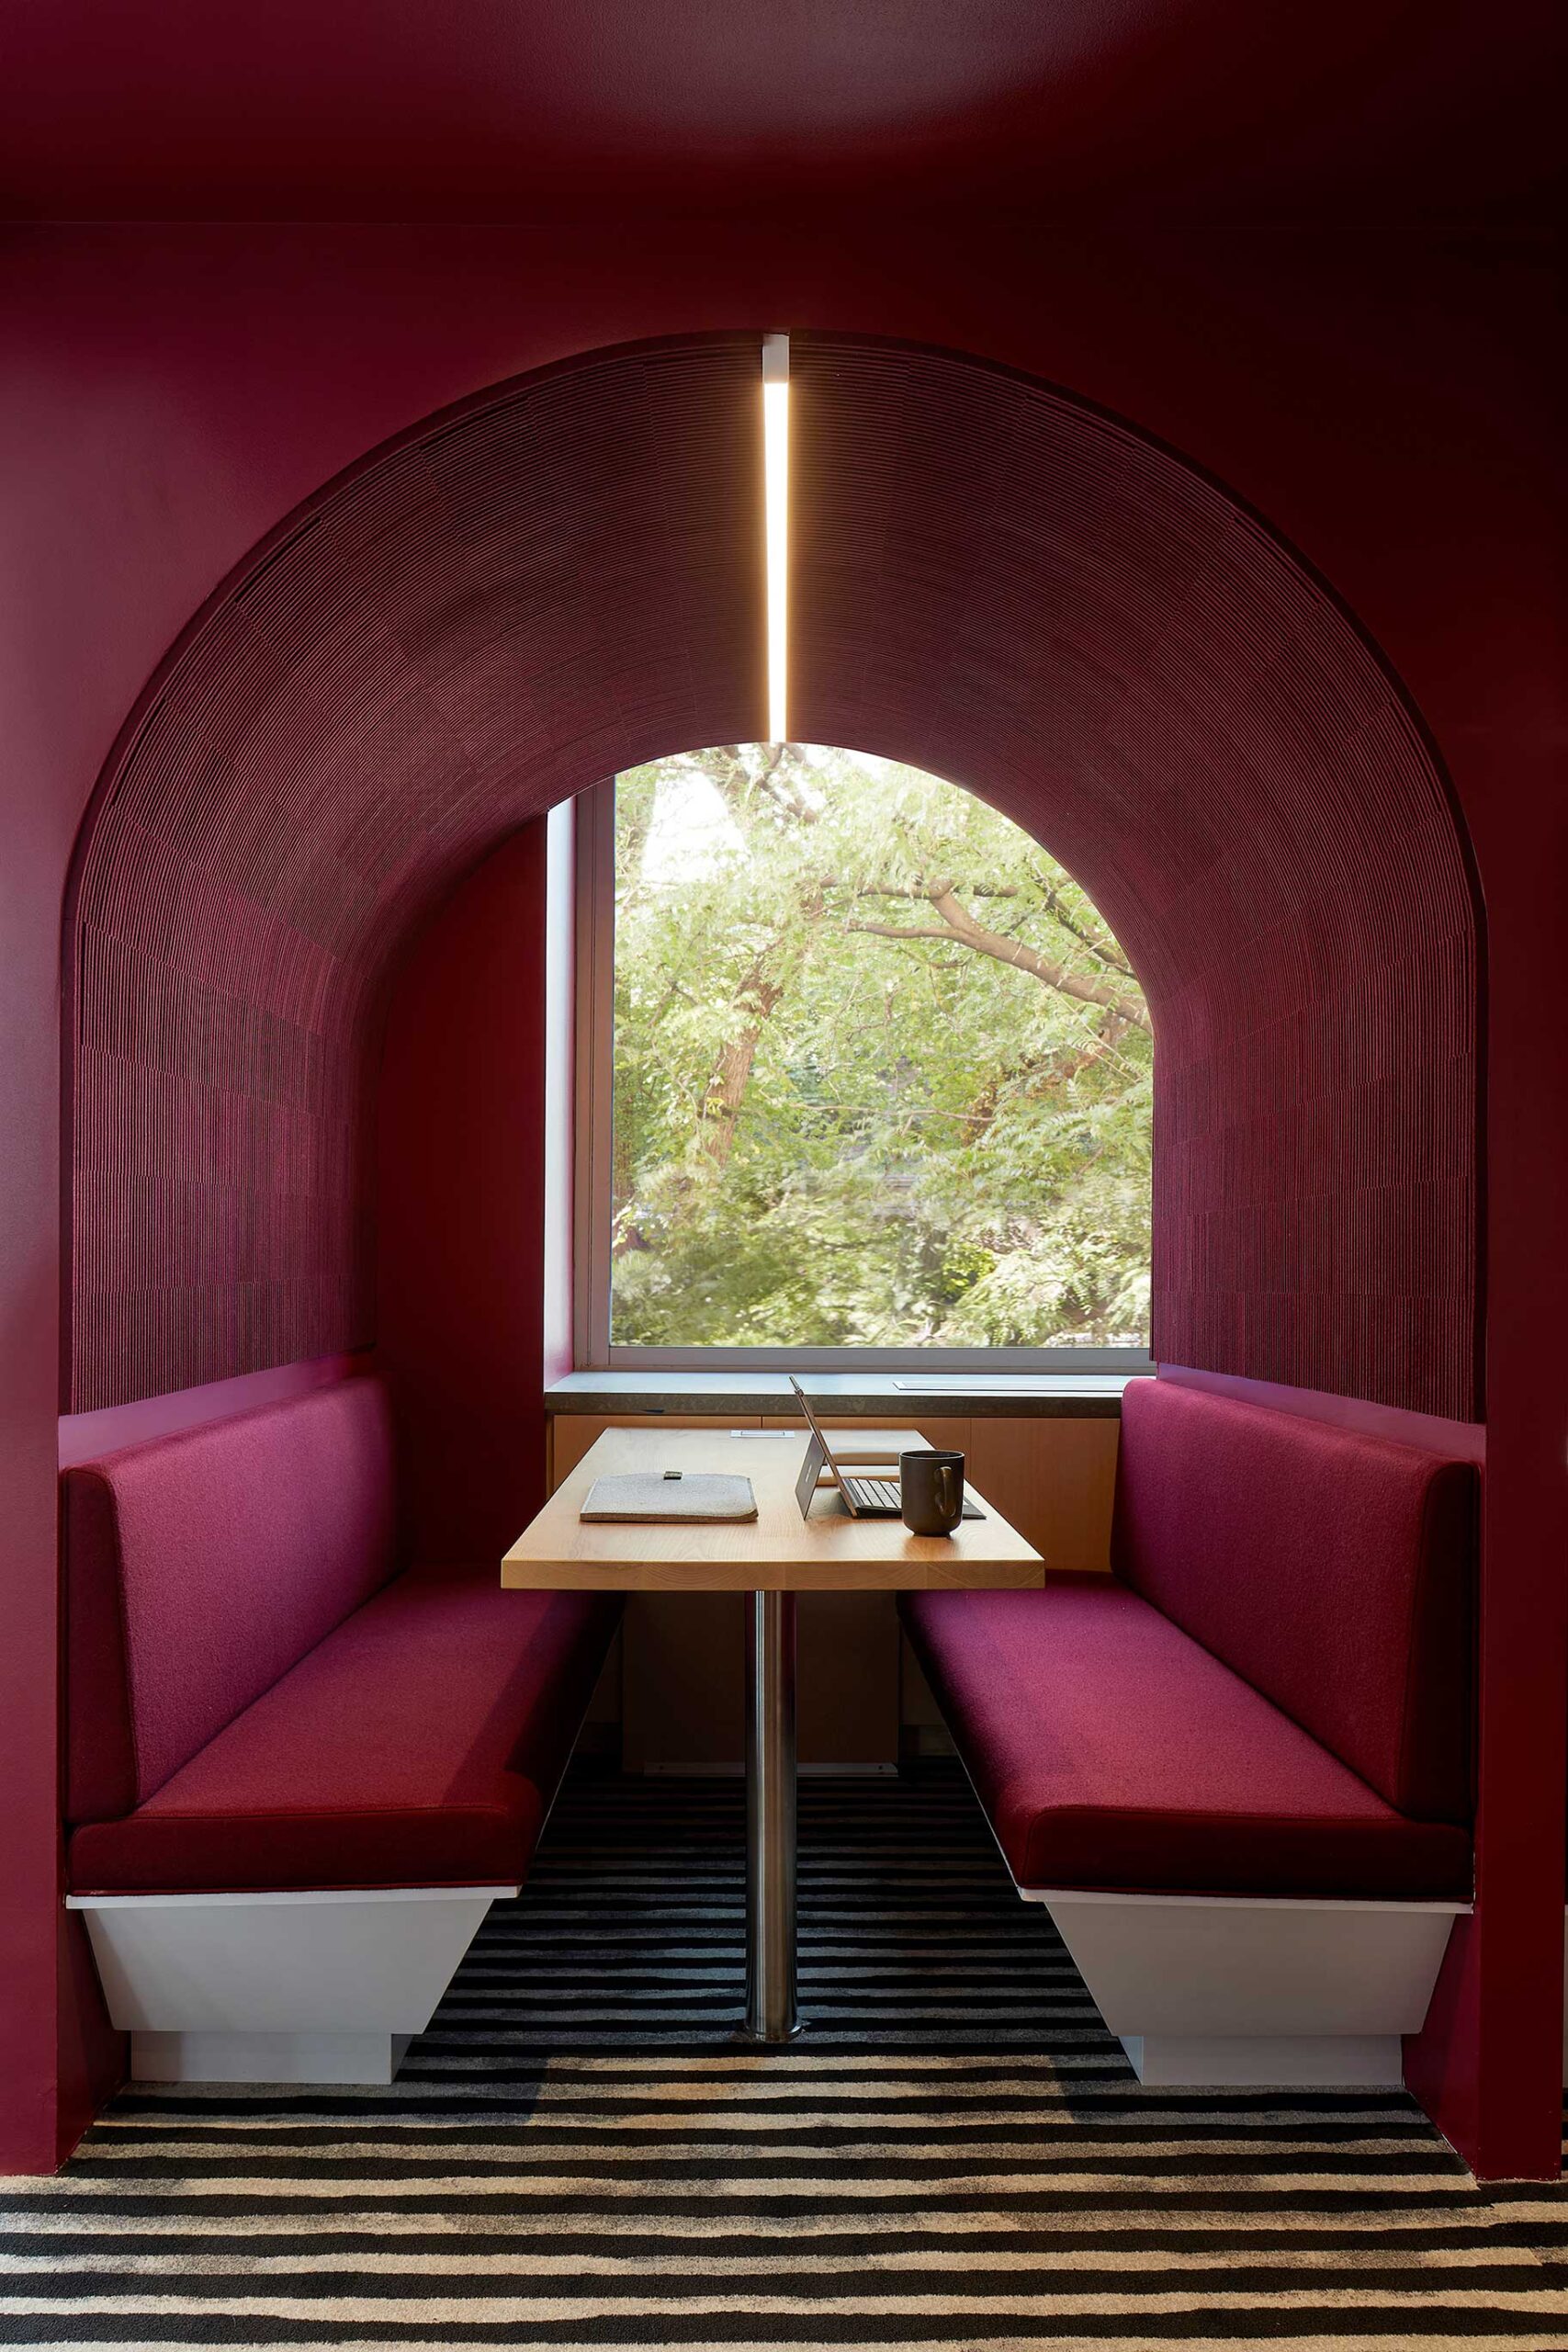 fuschia booth set into an arched curvalinear enclosure with filzfelt submaterial ribsy wallcovering in a deep wine color lining the arch for sound dampening